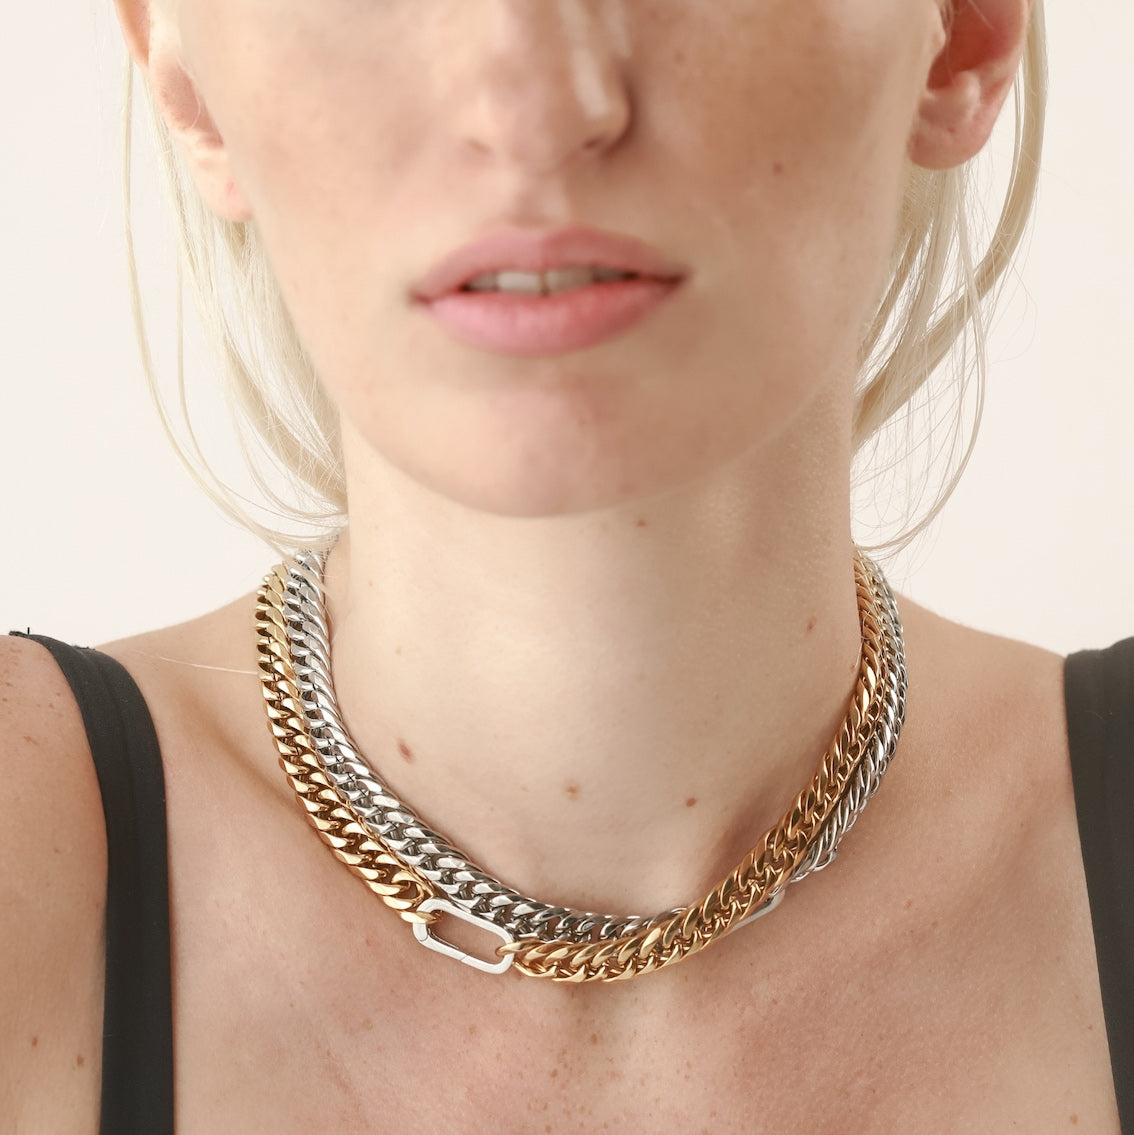 Metal Mesh Collar Necklace. Just For You!